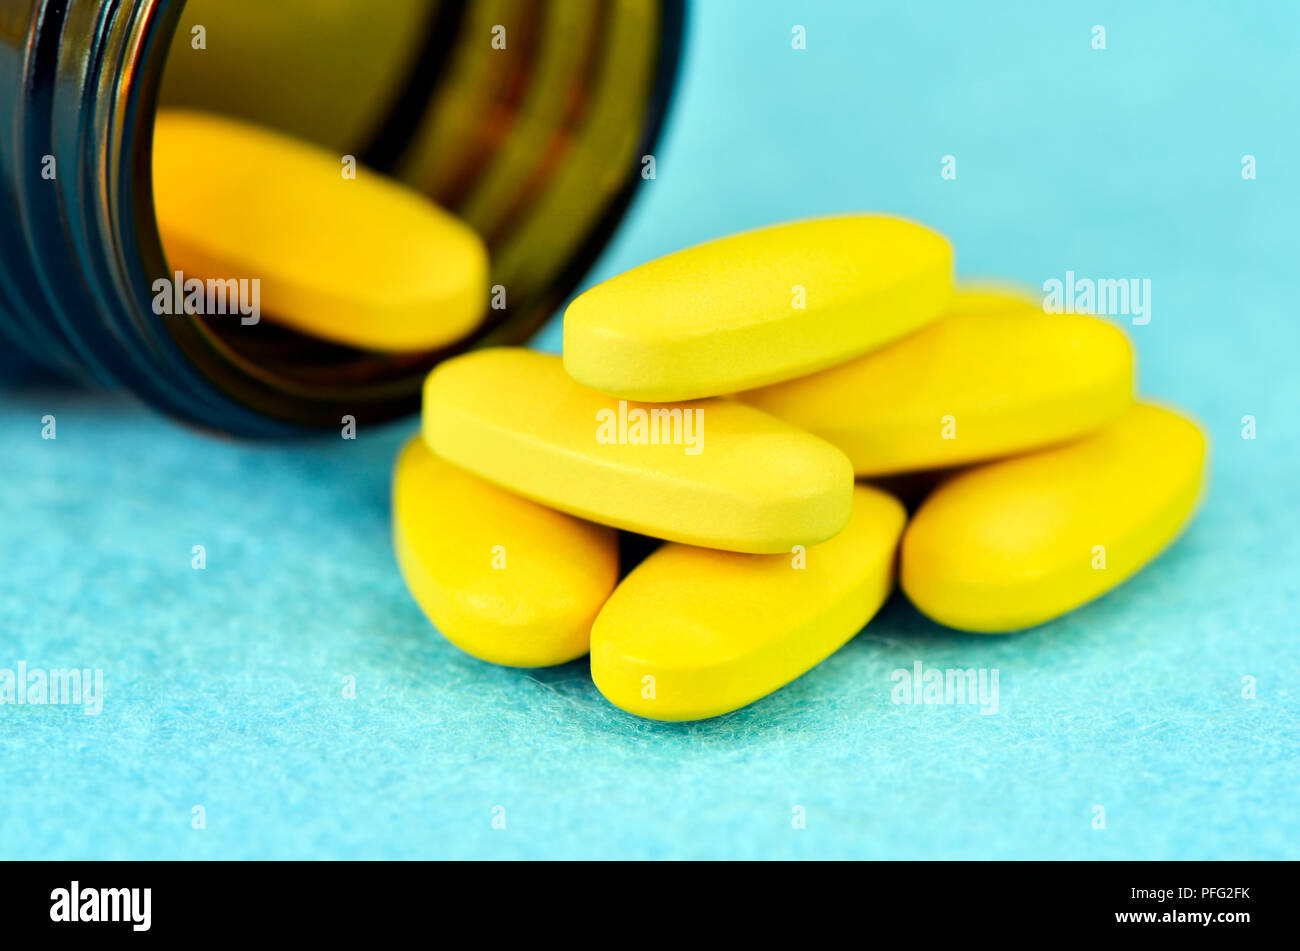 Vitamin C tablet on blue background. High dose vitamin C dietary supplement for immune booster. Stock Photo